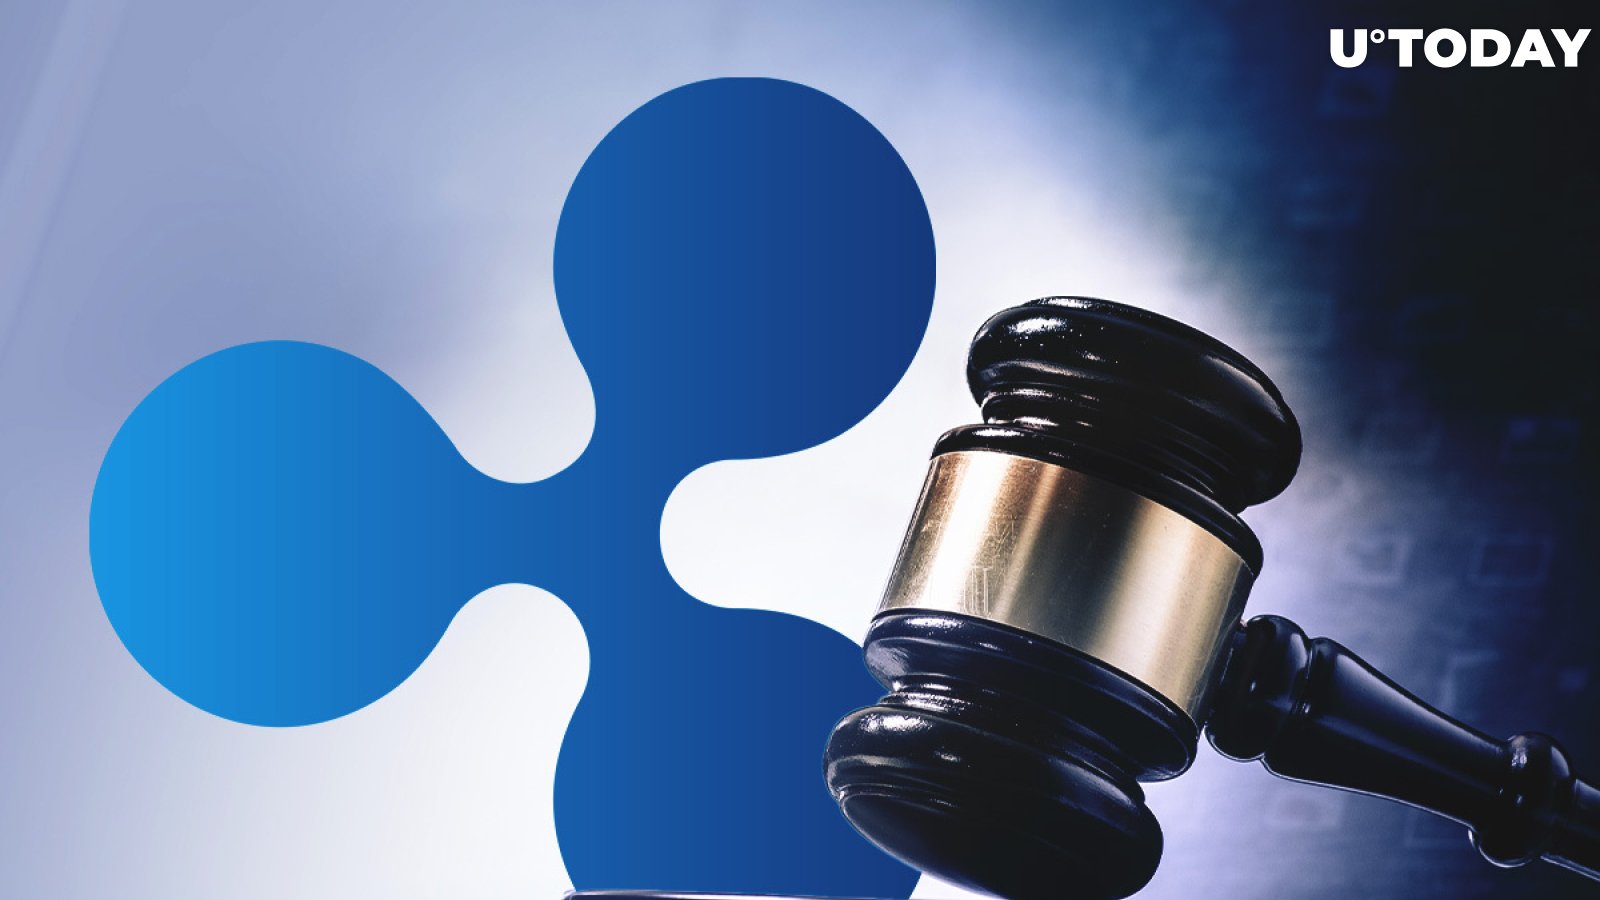 Former SEC Lawyer Claims Agency's Not Turning Back from Lawsuit Against Ripple